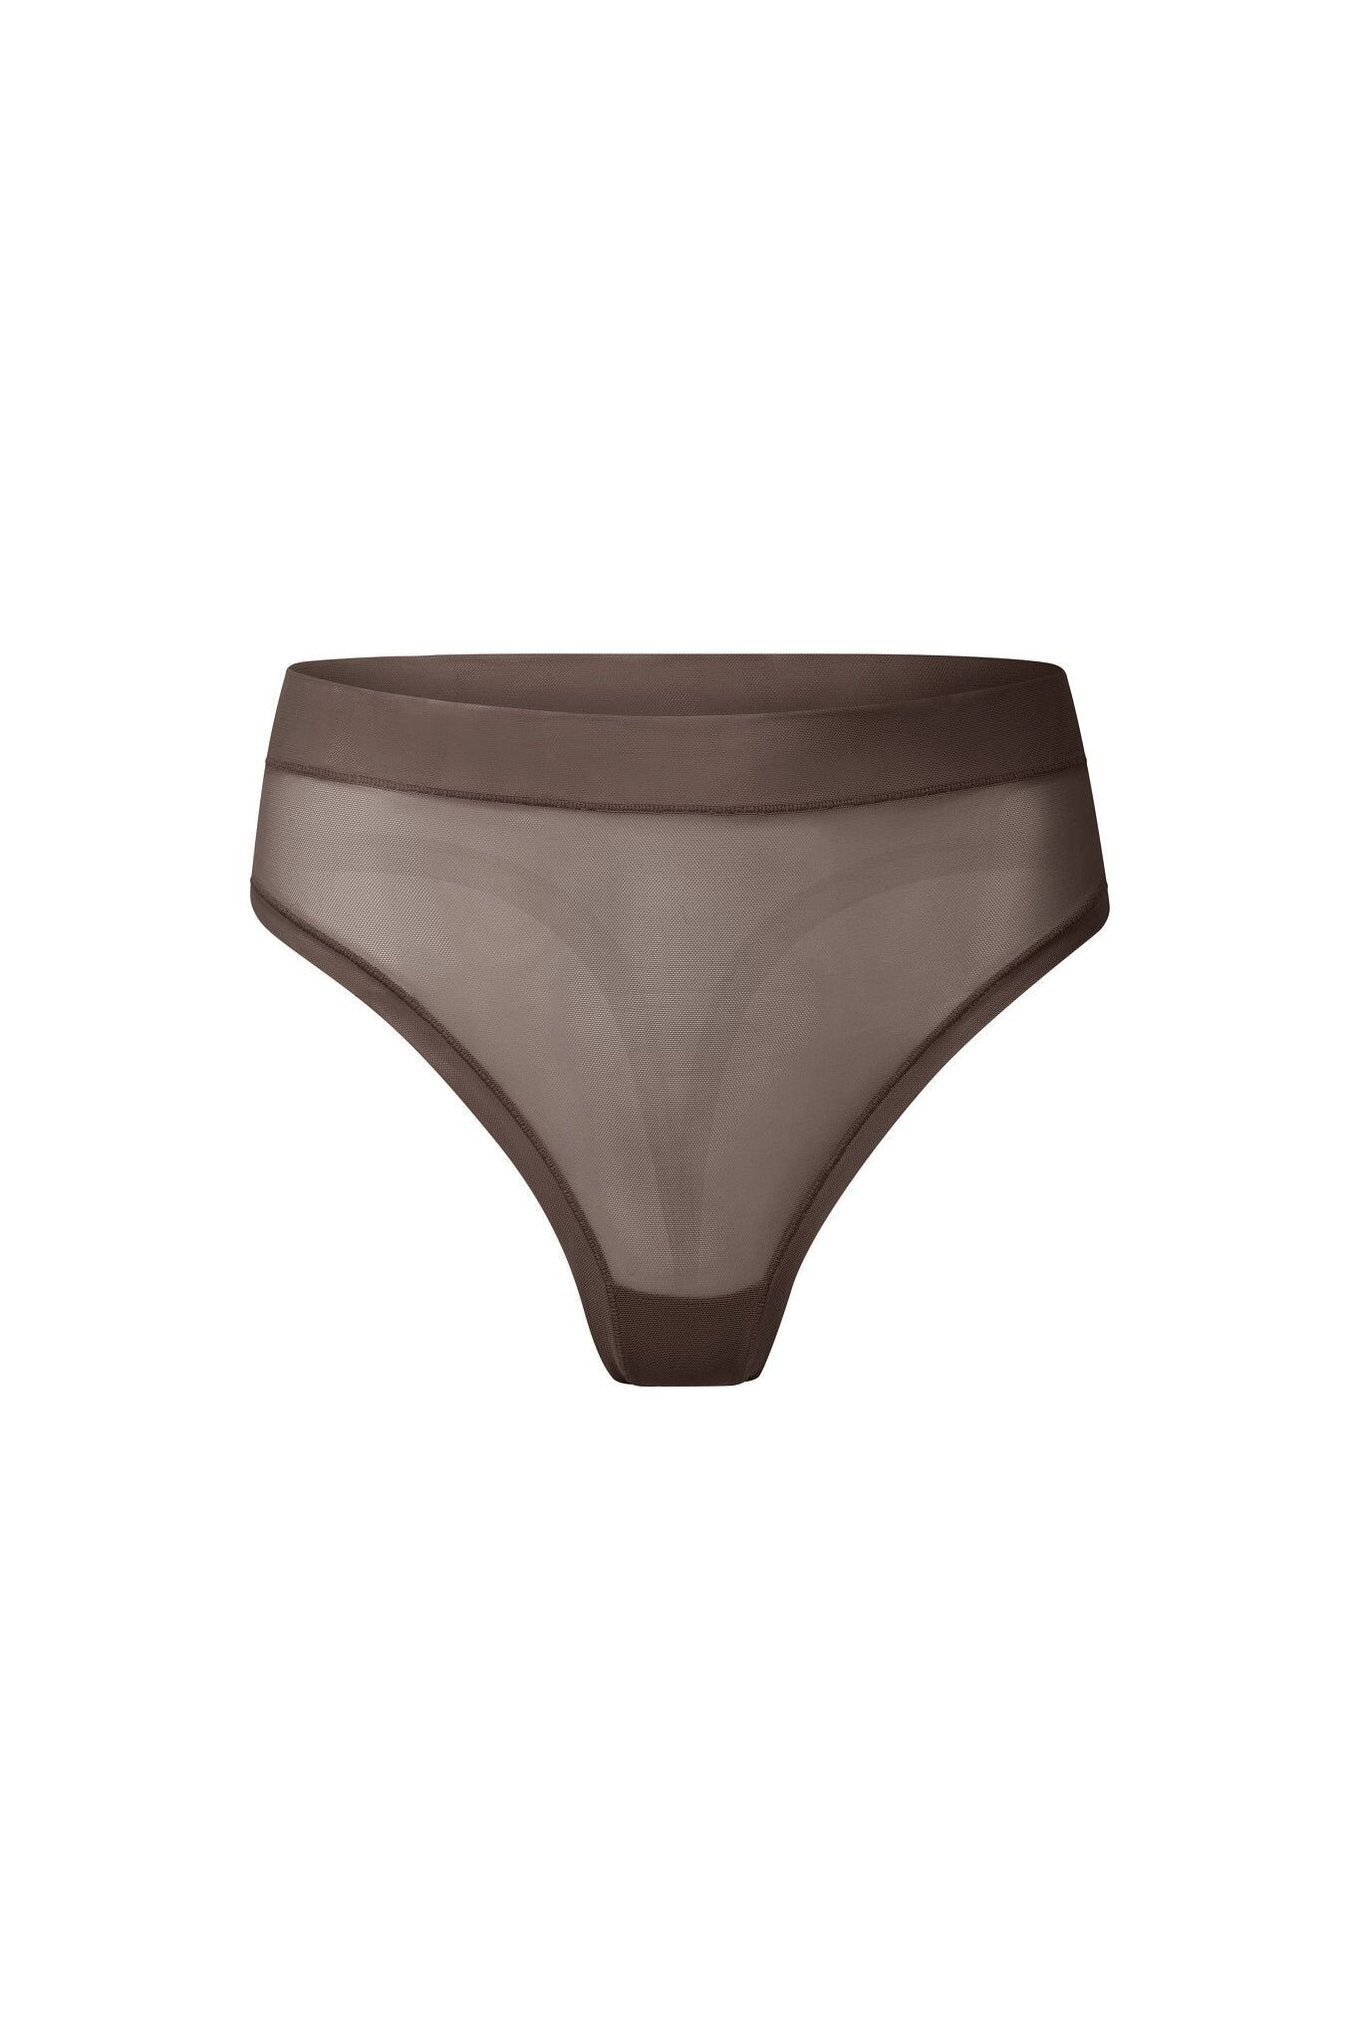 nueskin Carey Mesh Mid-Rise Thong in color Bracken and shape thong